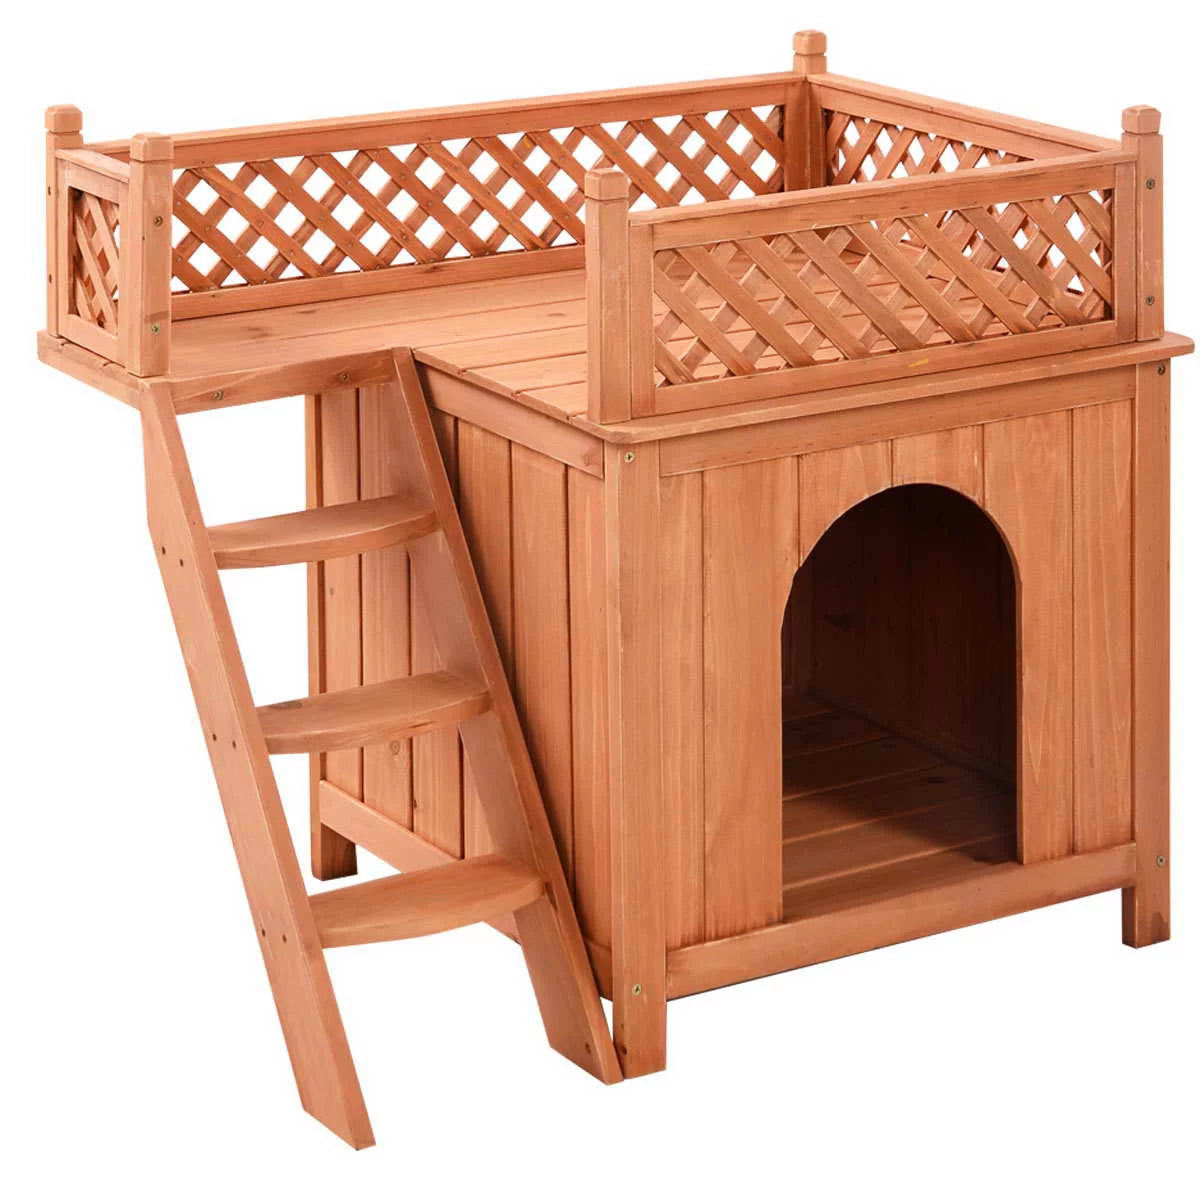 Topbuy Wooden Puppy Dog House Wood Pet Room W/ Raised Roof for Balcony